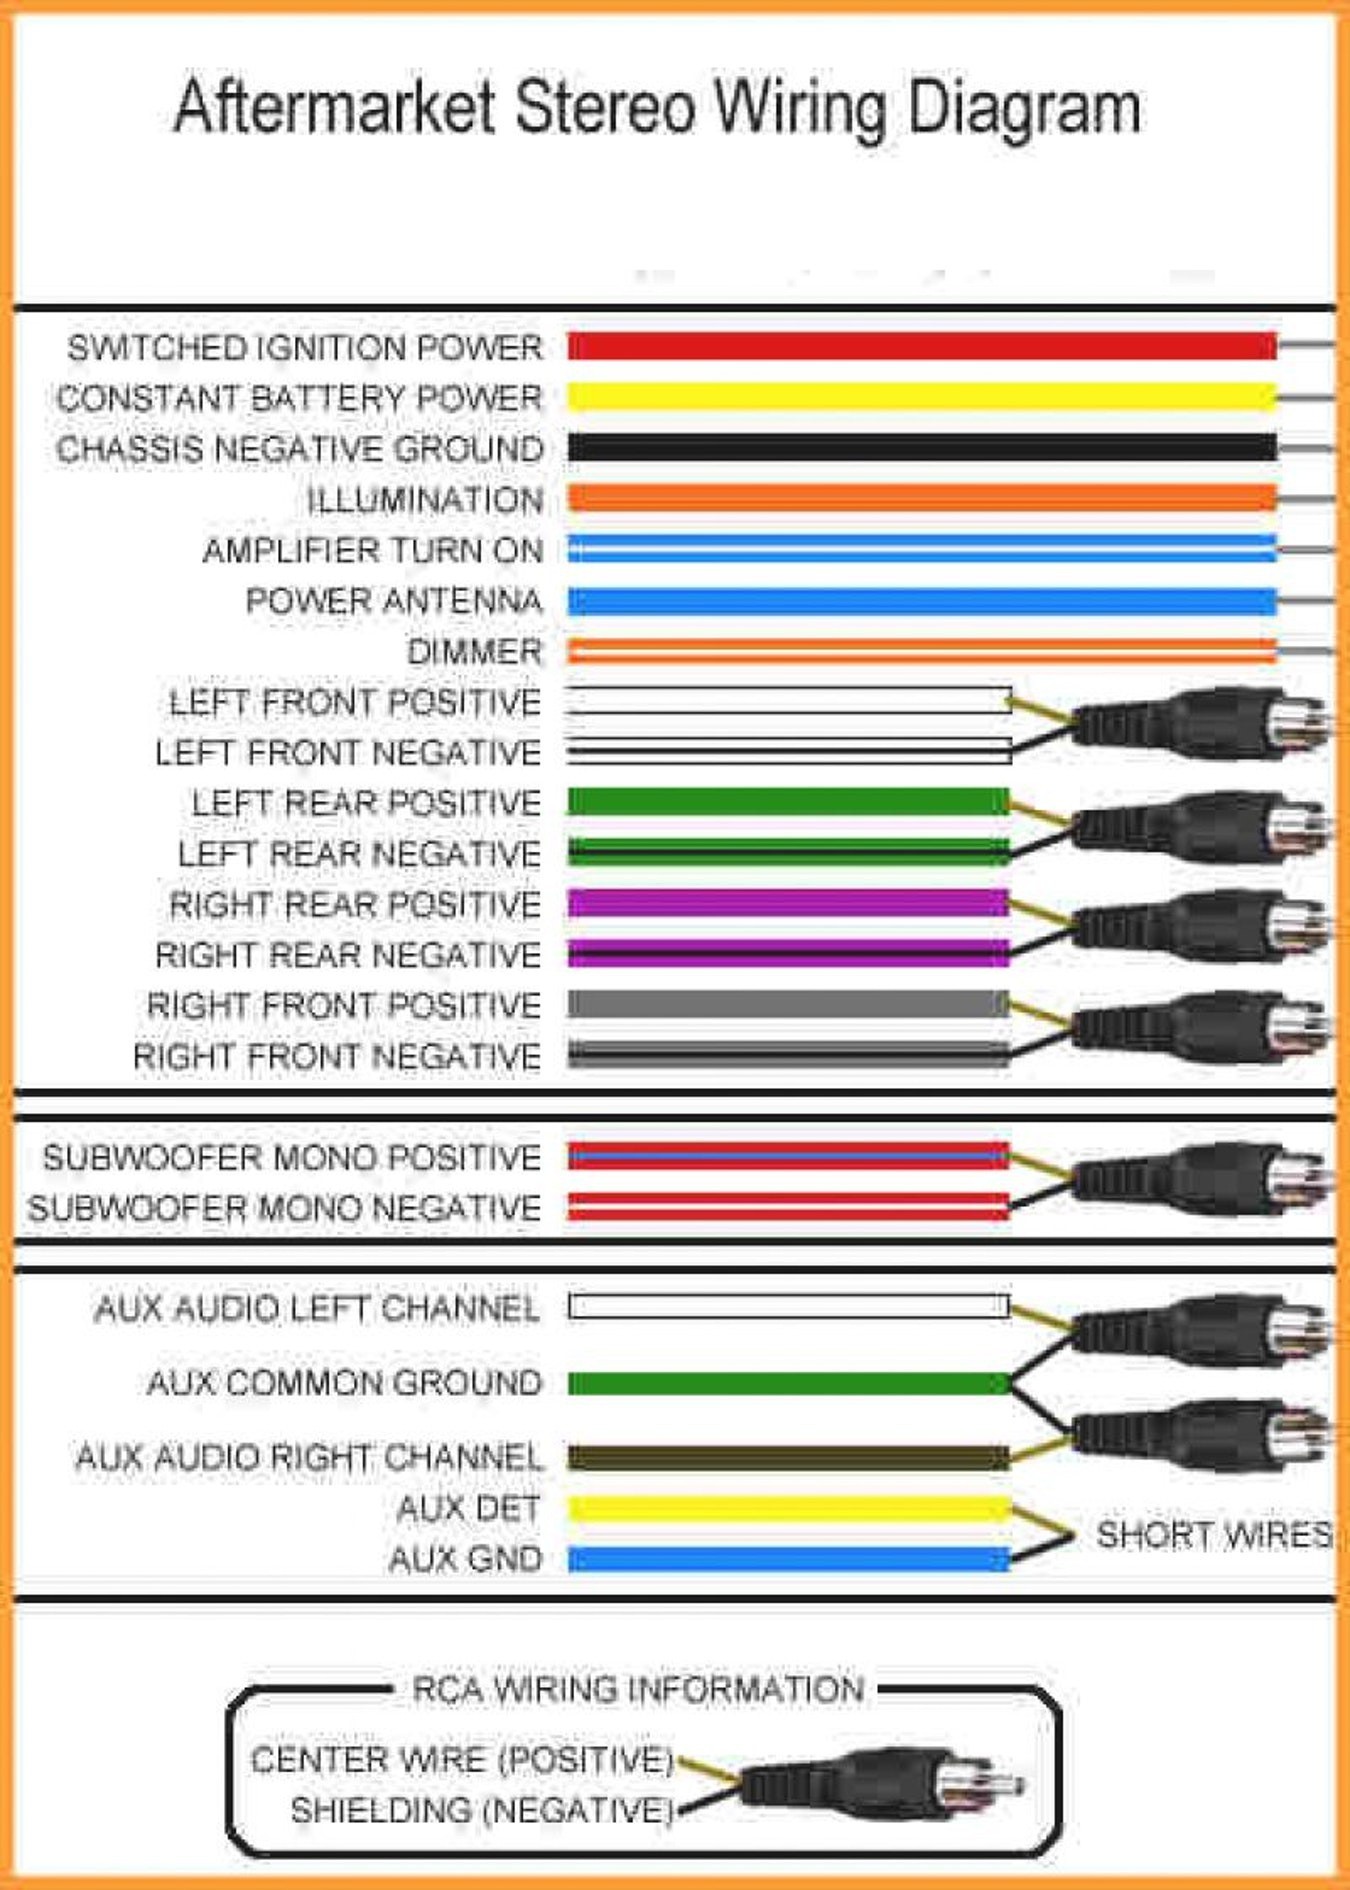 kenwood wiring diagram colors Collection Wiring Diagram For Kenwood Deck Valid Radio Colors Database Harness DOWNLOAD Wiring Diagram